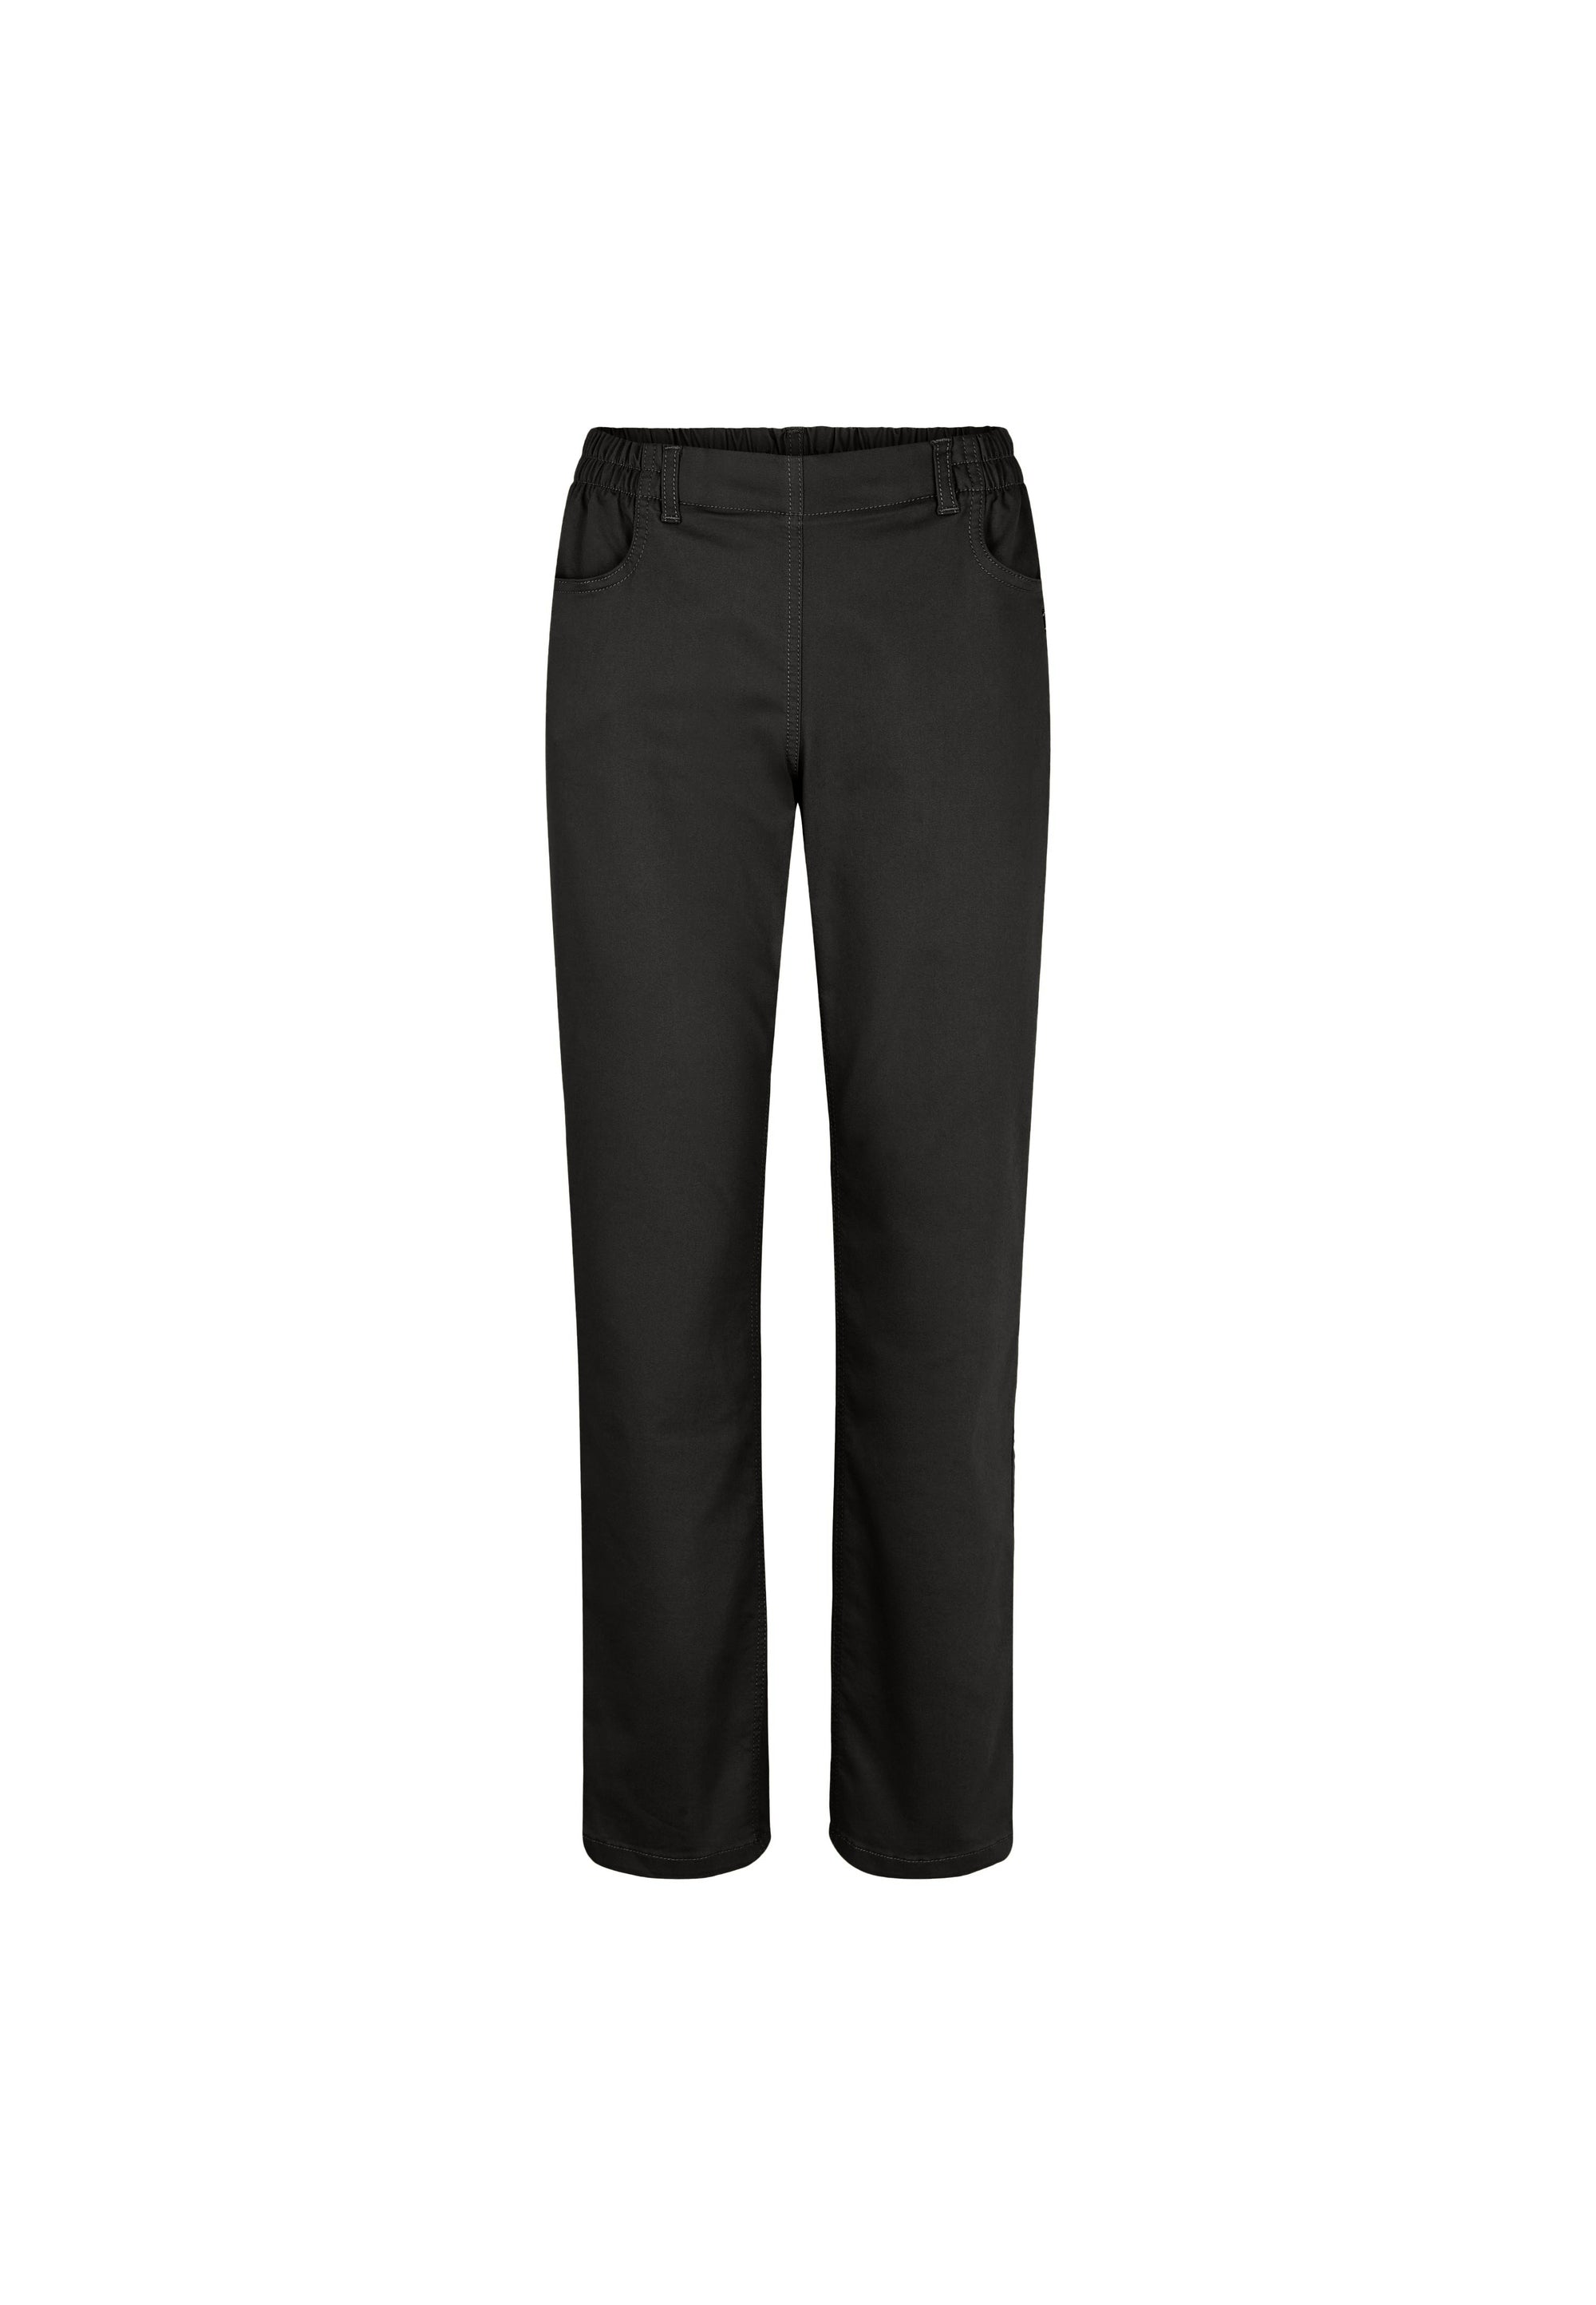 LAURIE Violet Relaxed - Medium Length Trousers RELAXED Schwarz